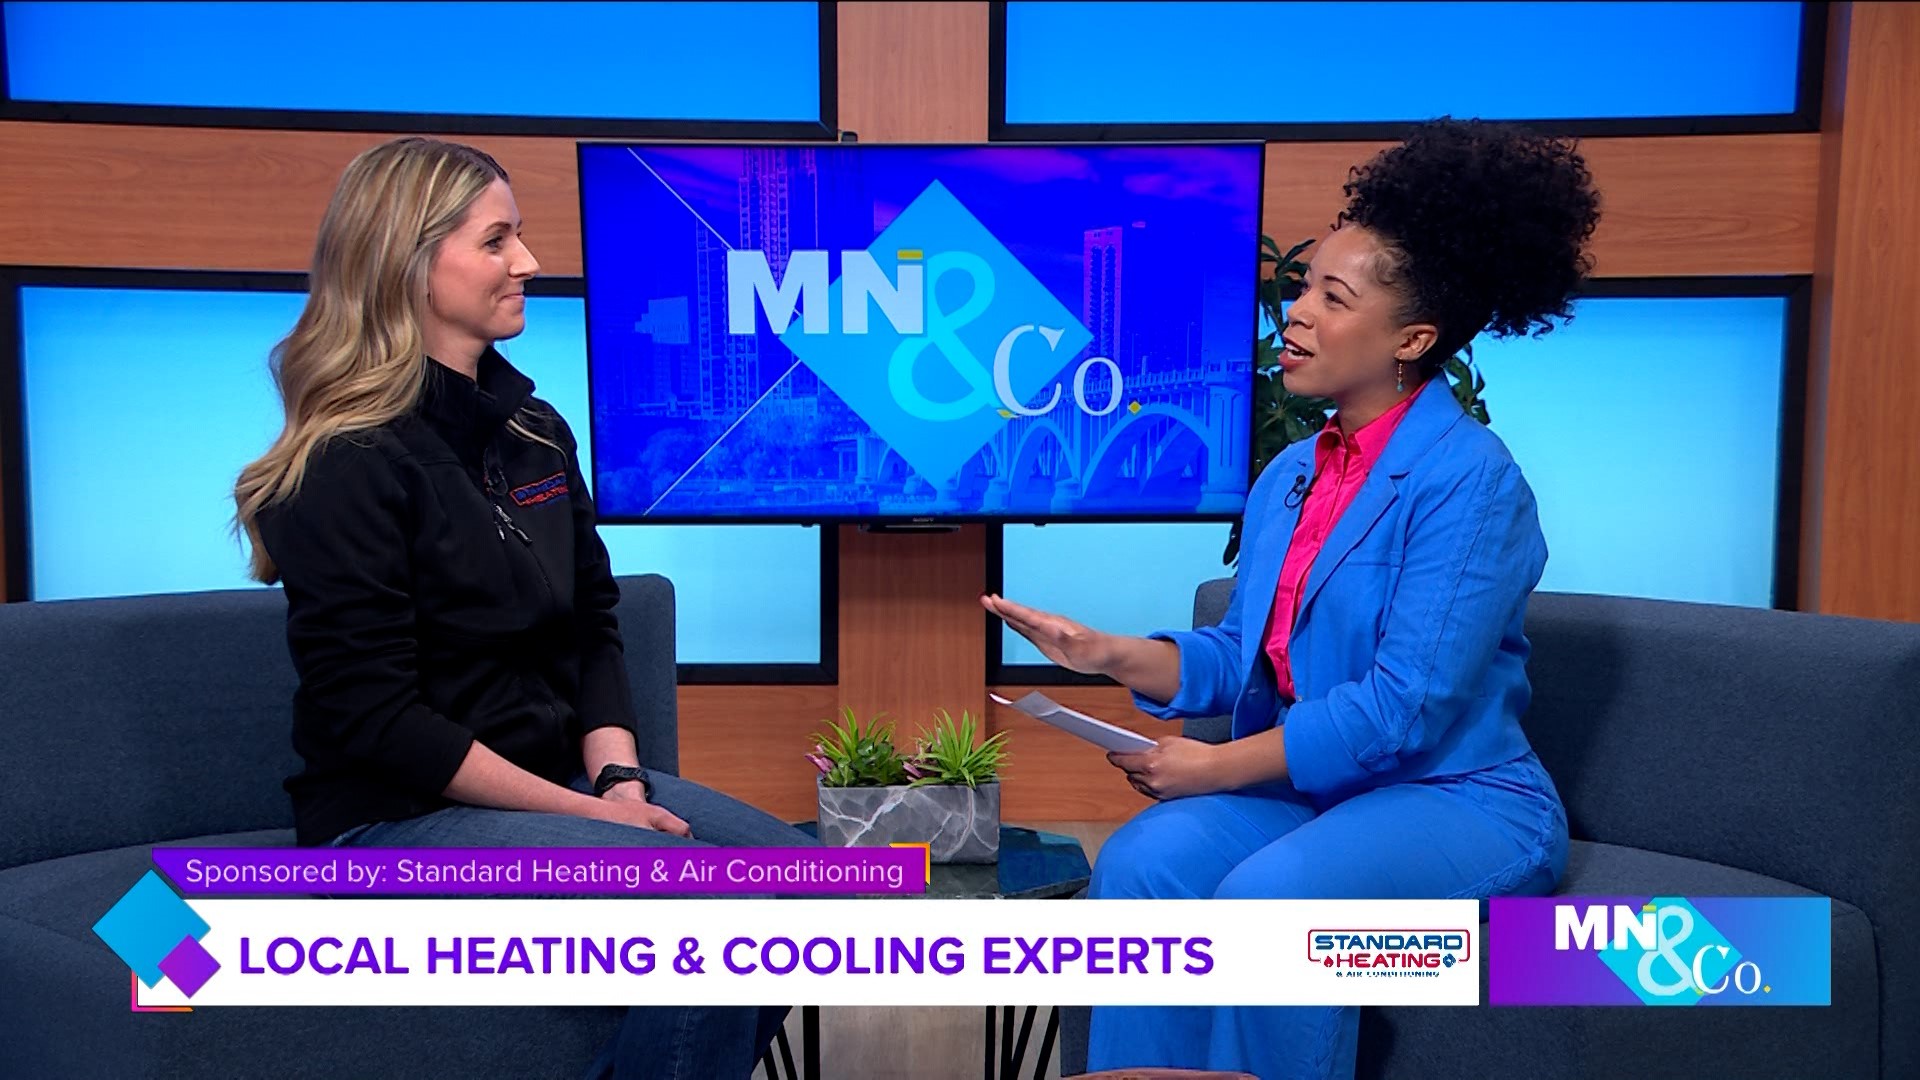 Standard Heating & Air Conditioning joins Minnesota and Company to discuss how their 94-year old HVAC business continues to serve their community.